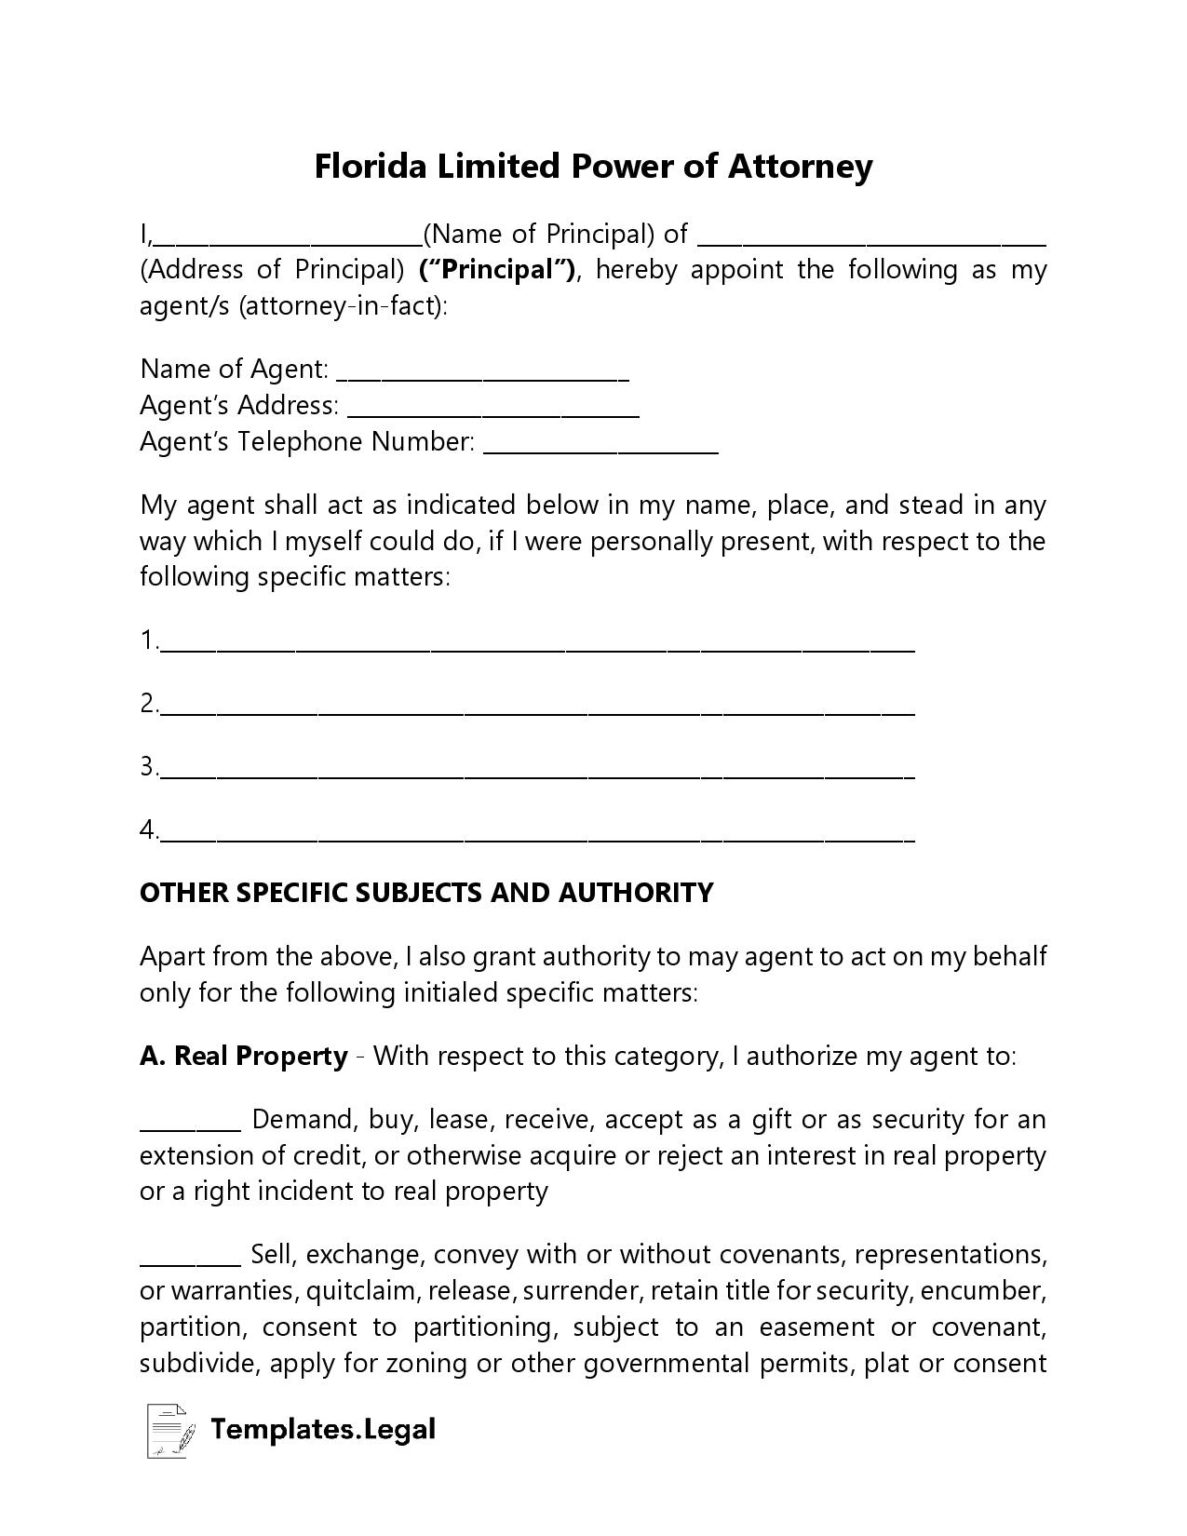 Florida Power of Attorney Templates (Free) [Word, PDF & ODT]